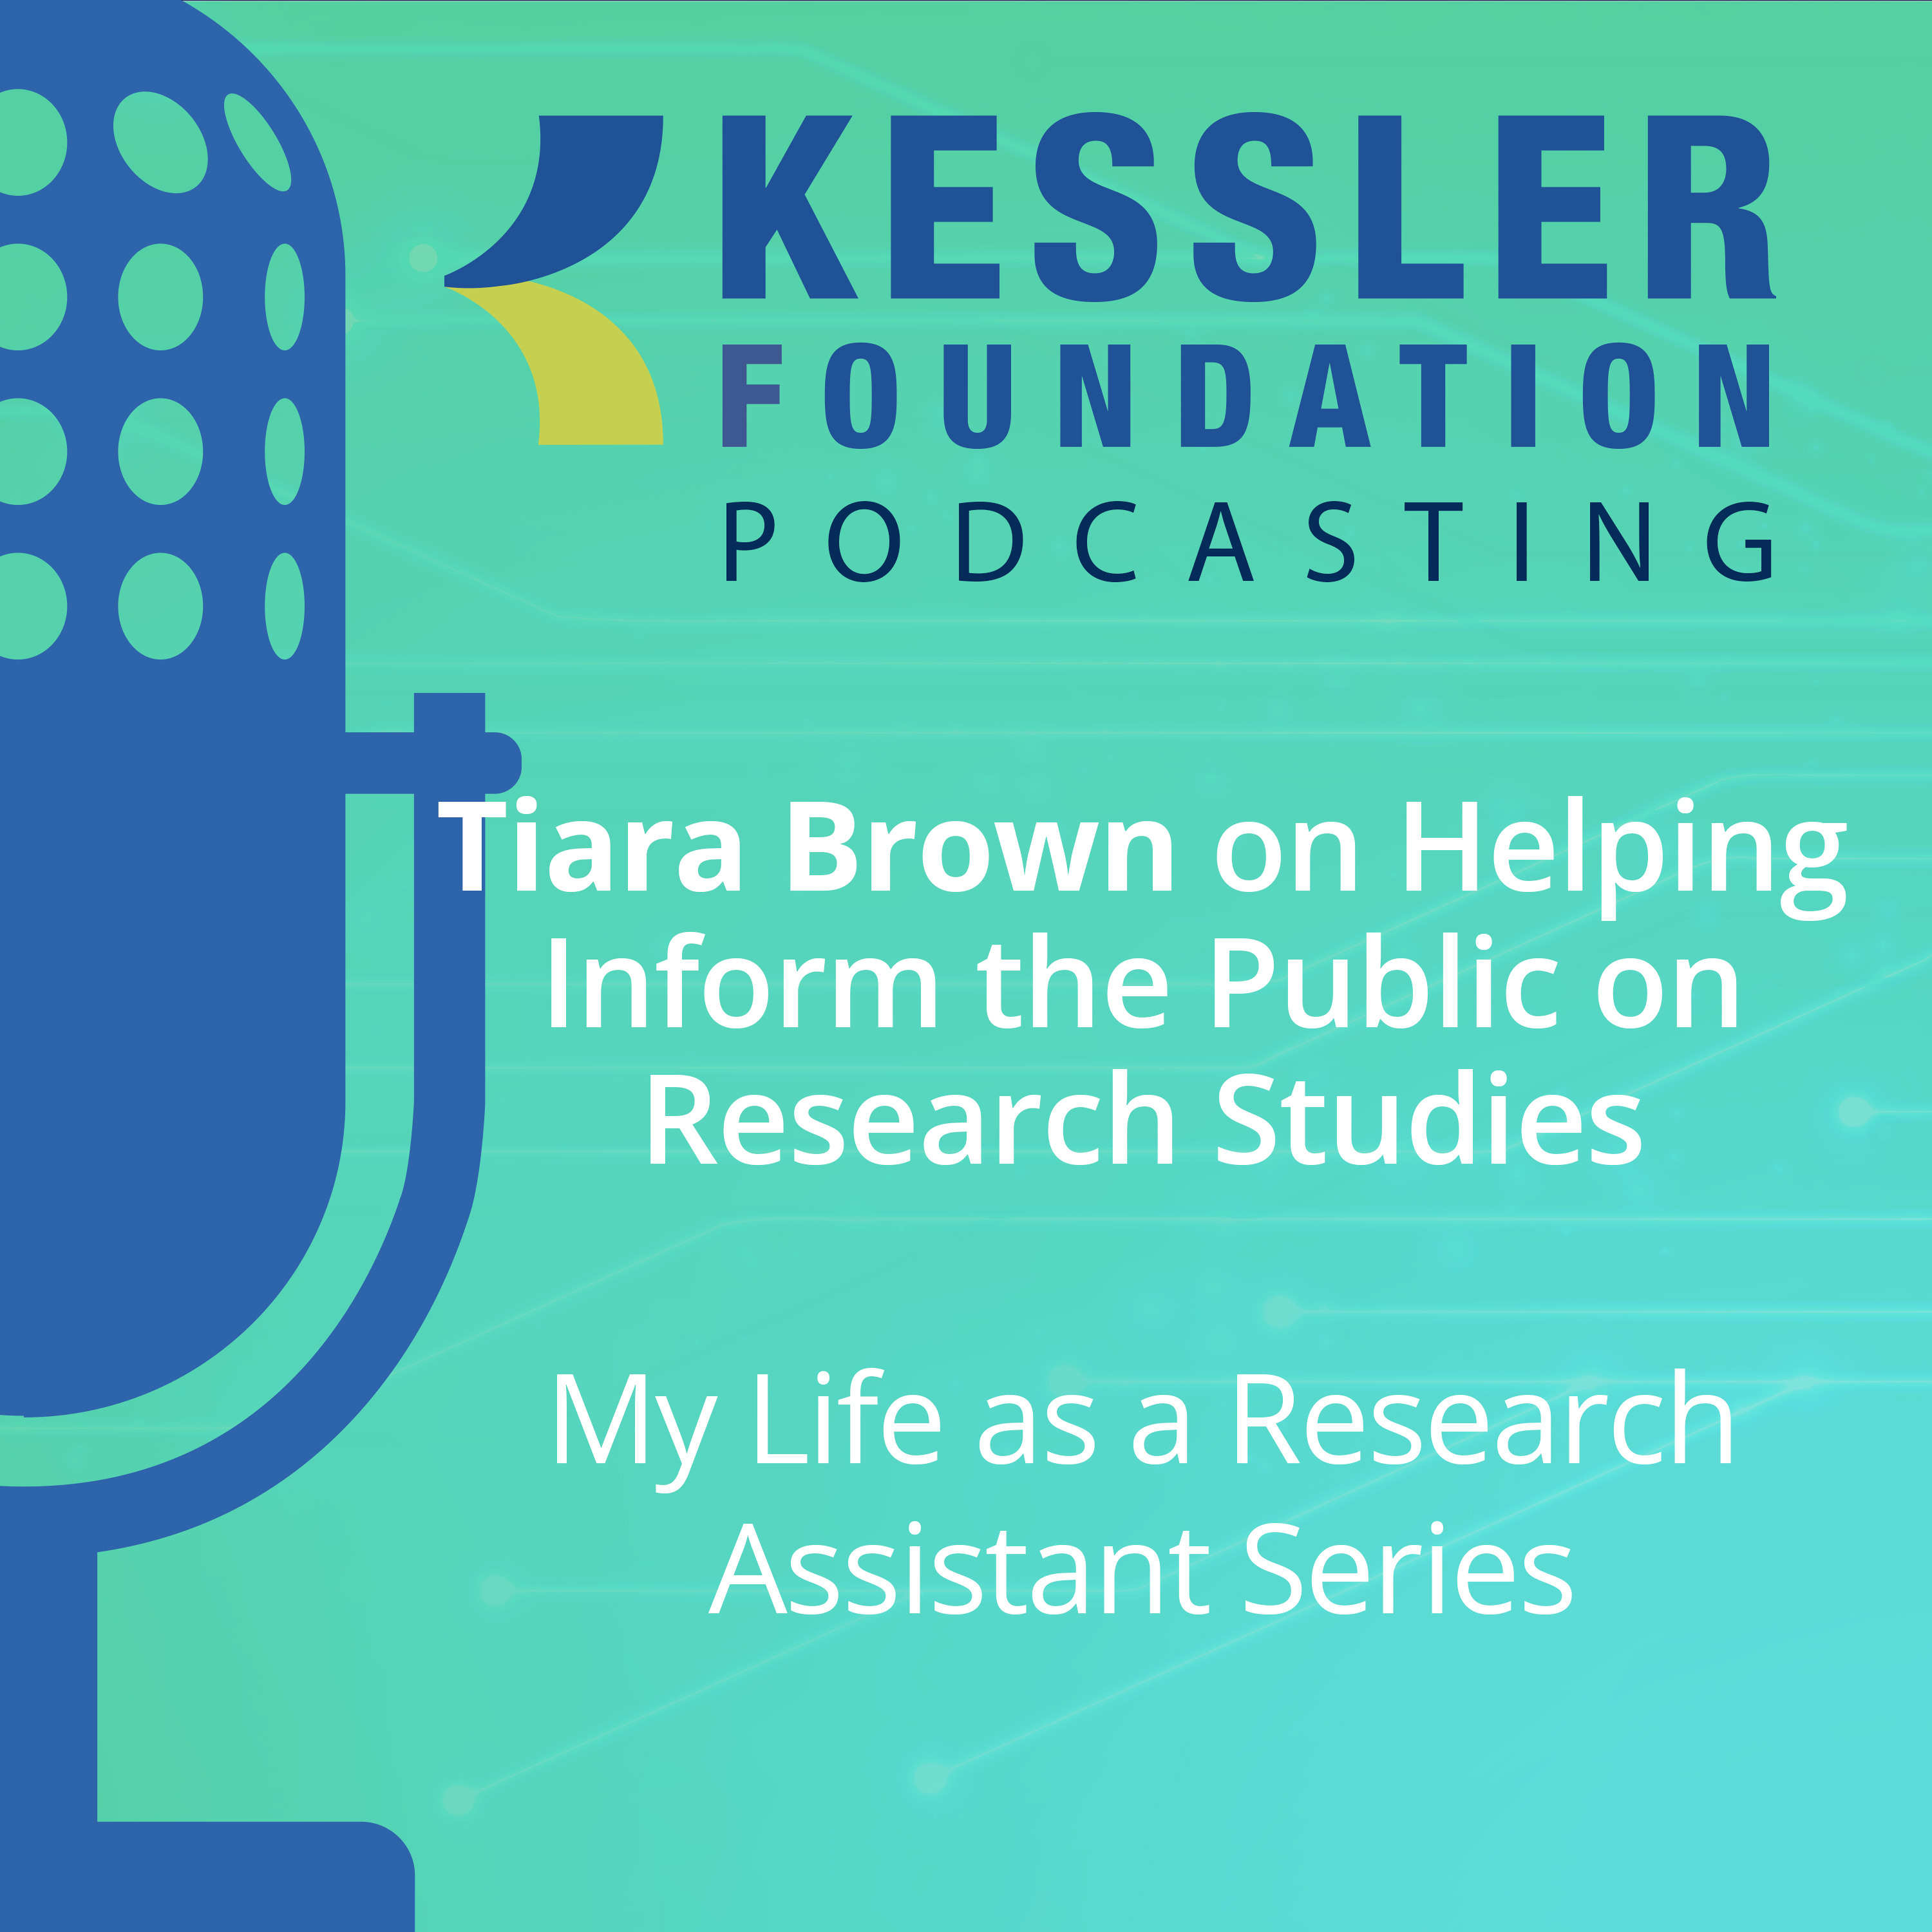 Tiara Brown on Helping Inform the Public on Research Studies